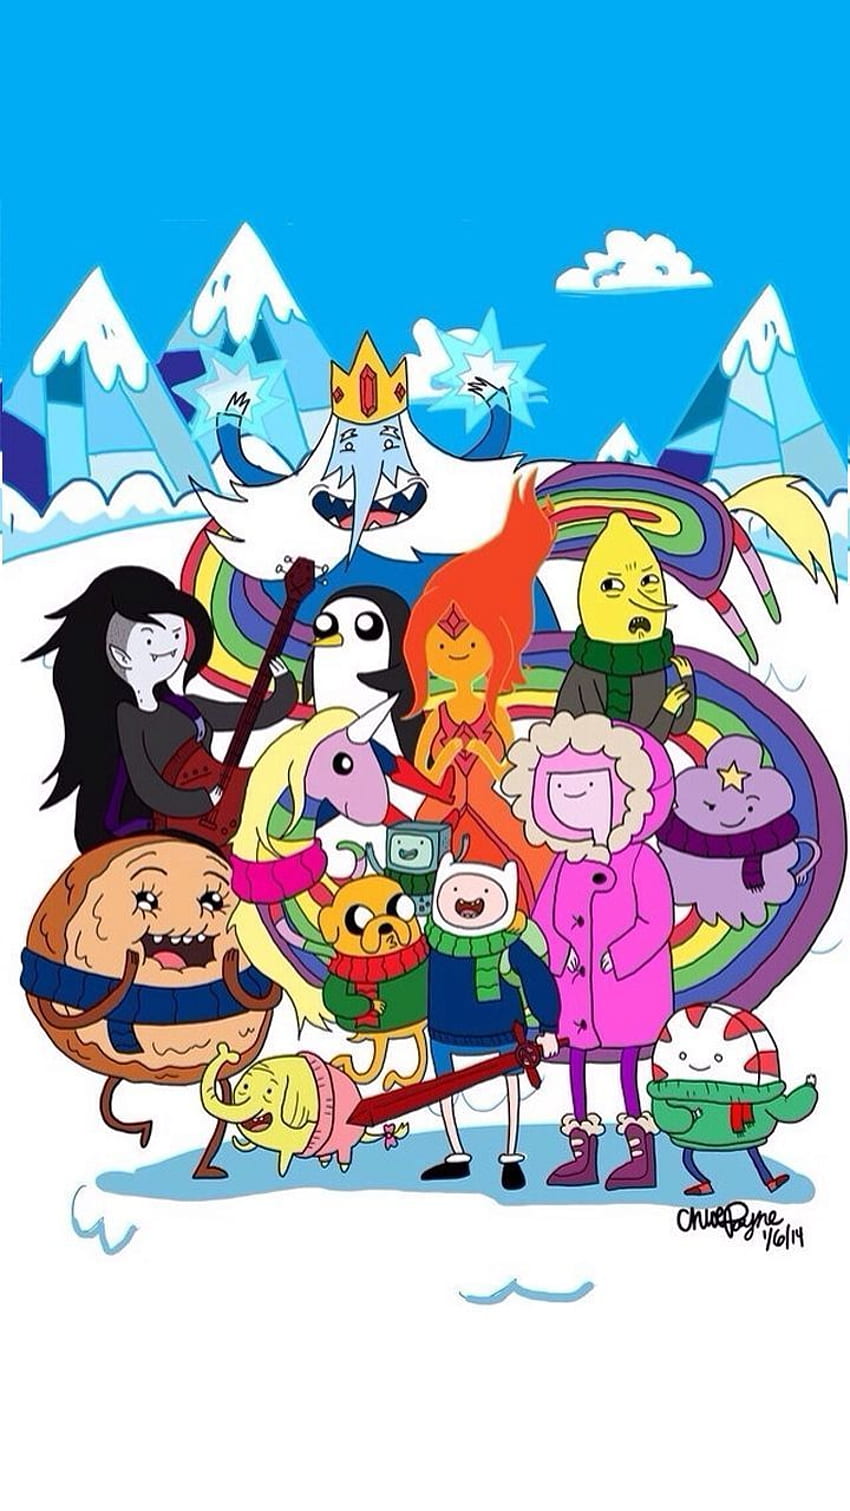 78 Adventure Time Wallpaper Iphone on WallpaperSafari  Adventure time  Adventure Adventure time wallpaper